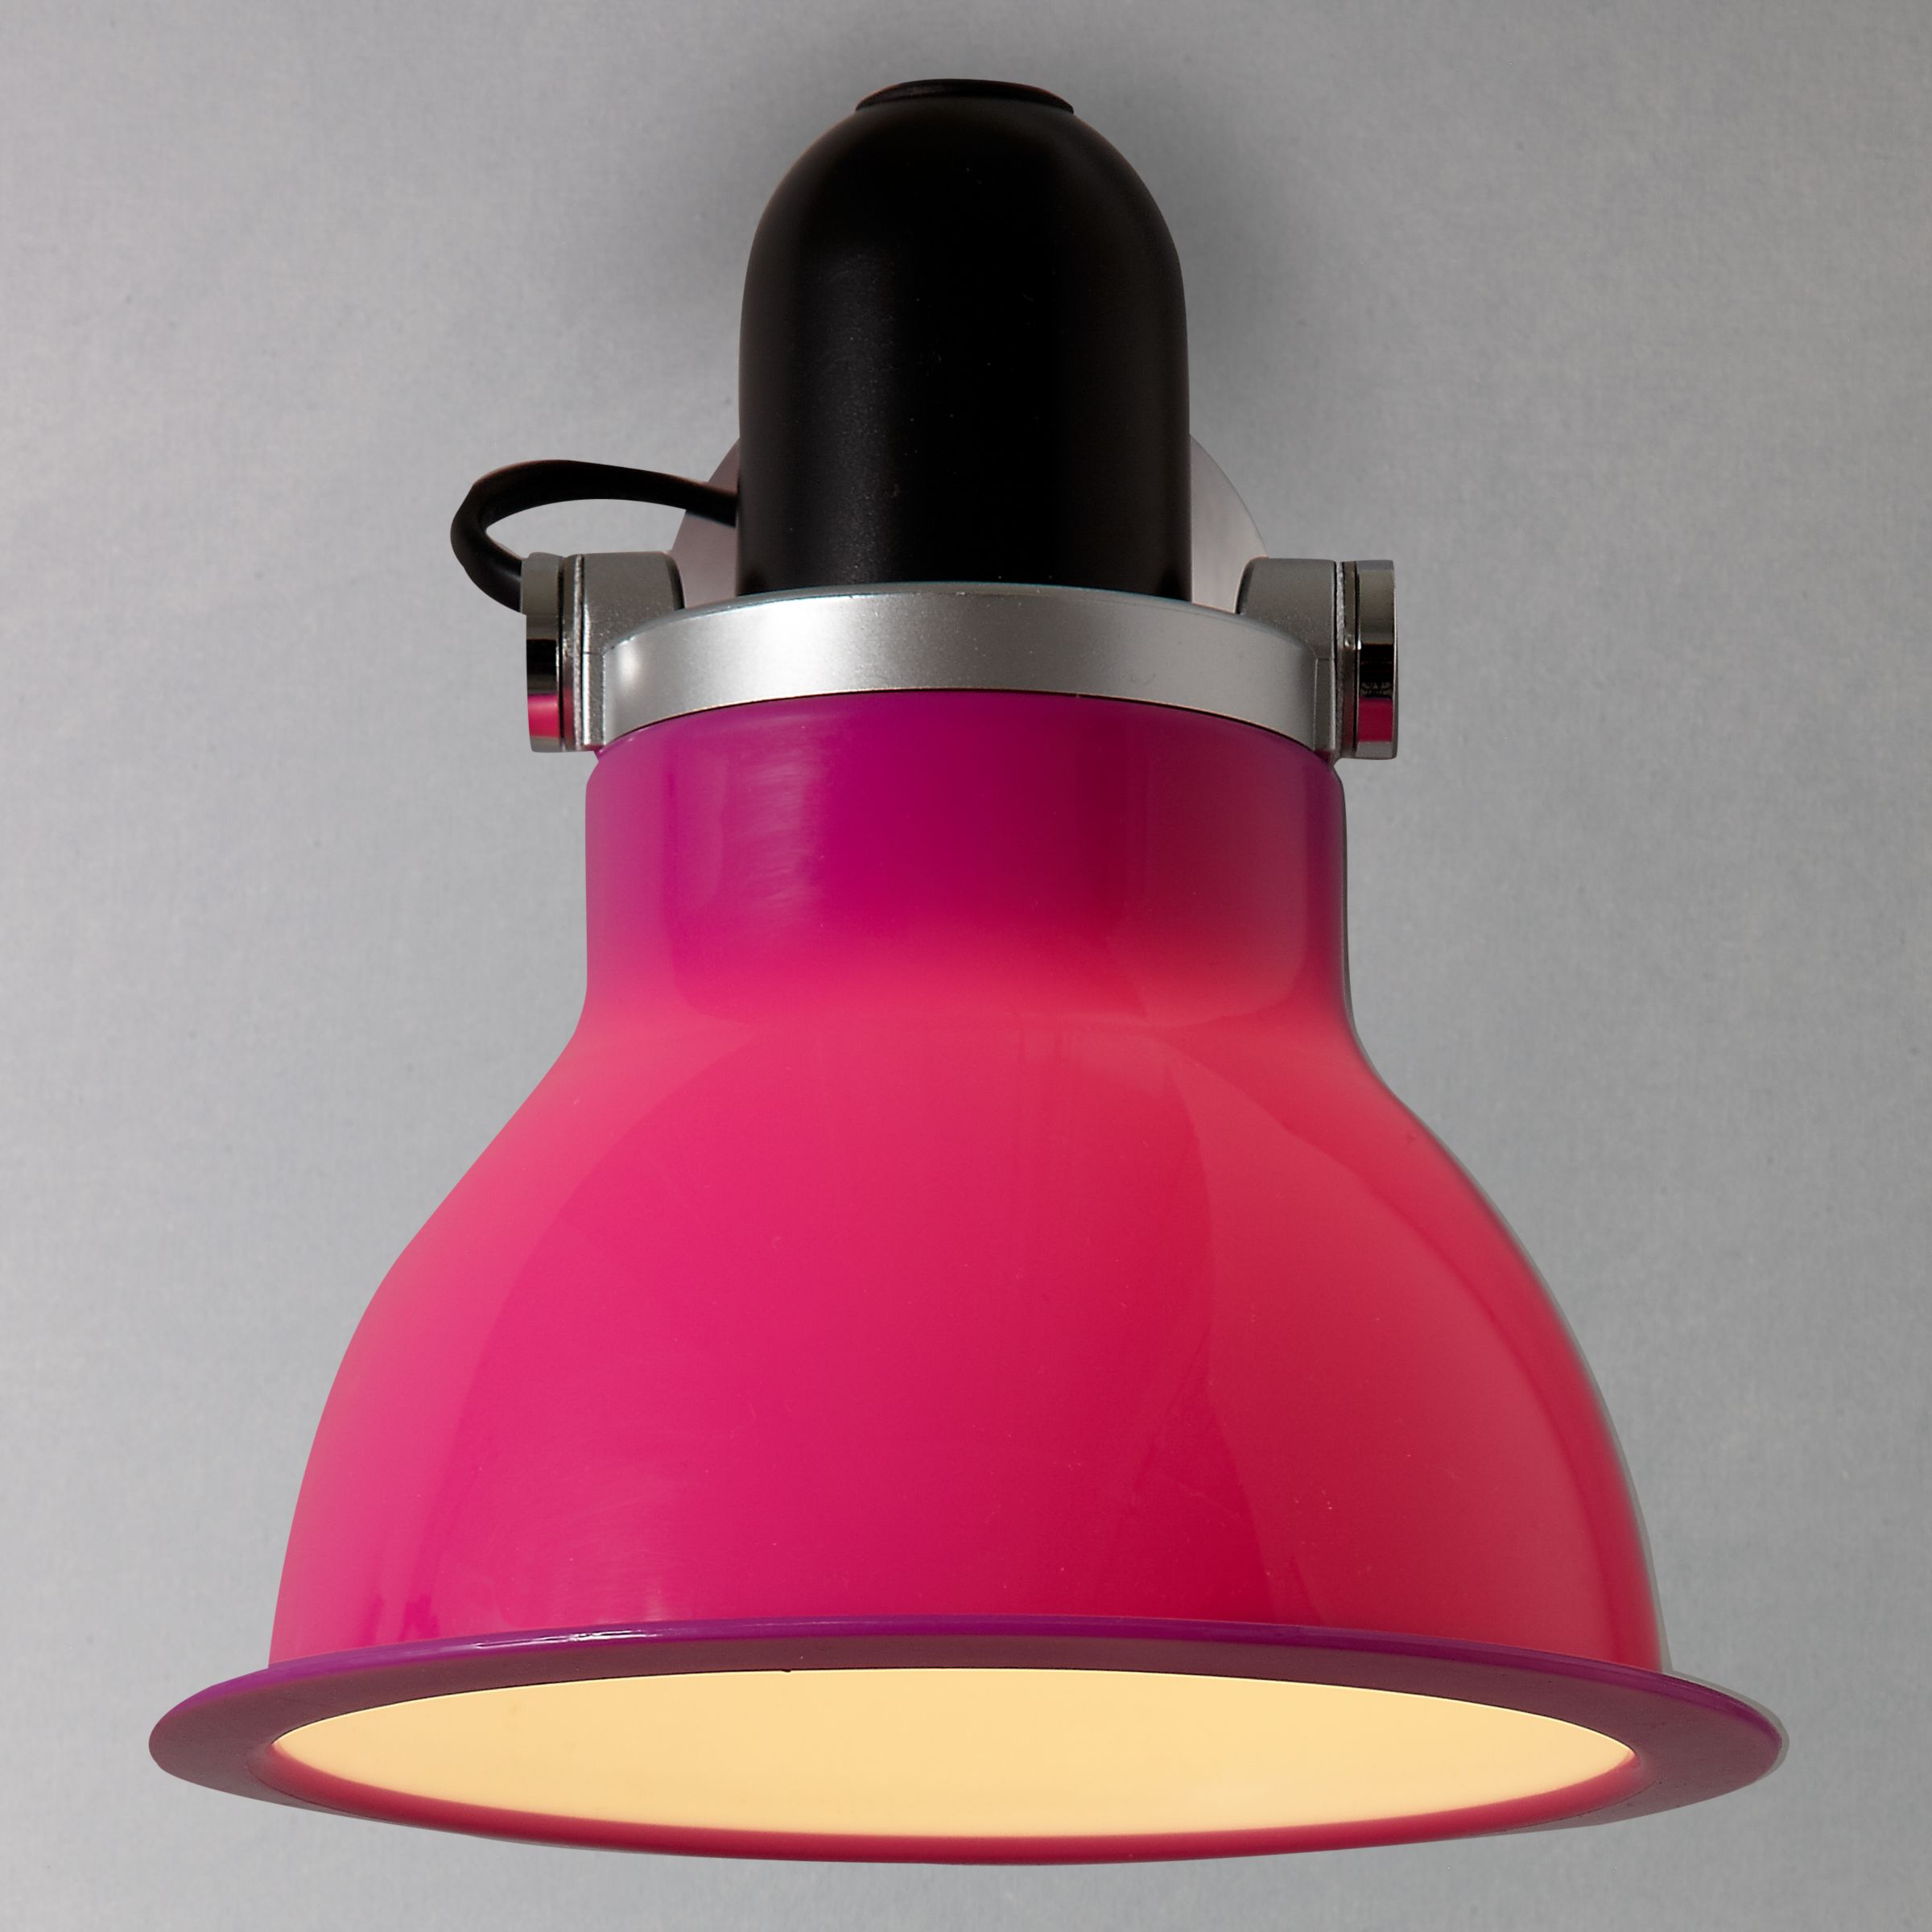 Anglepoise Type 1228 Wall Light, Pink